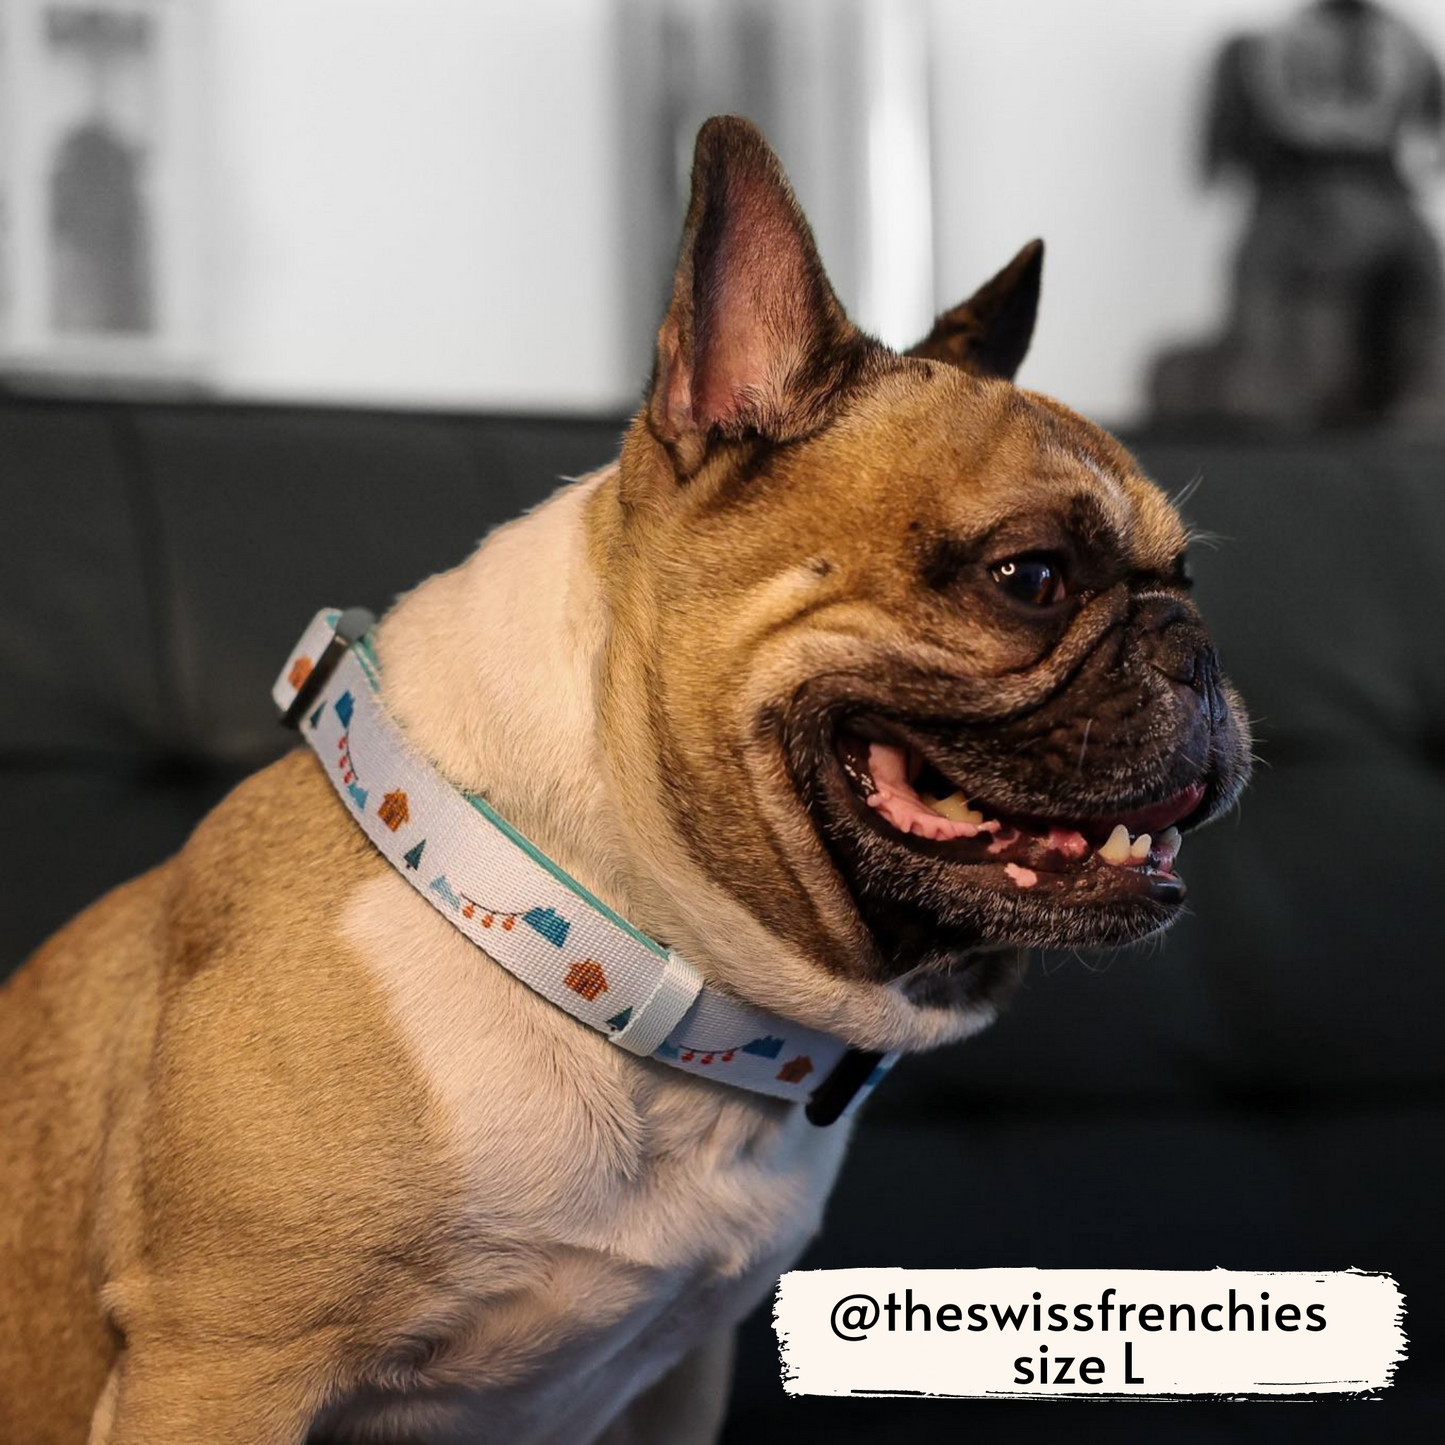 Les Alpes dog collar as seen on @theswissfrenchies, wearing size L